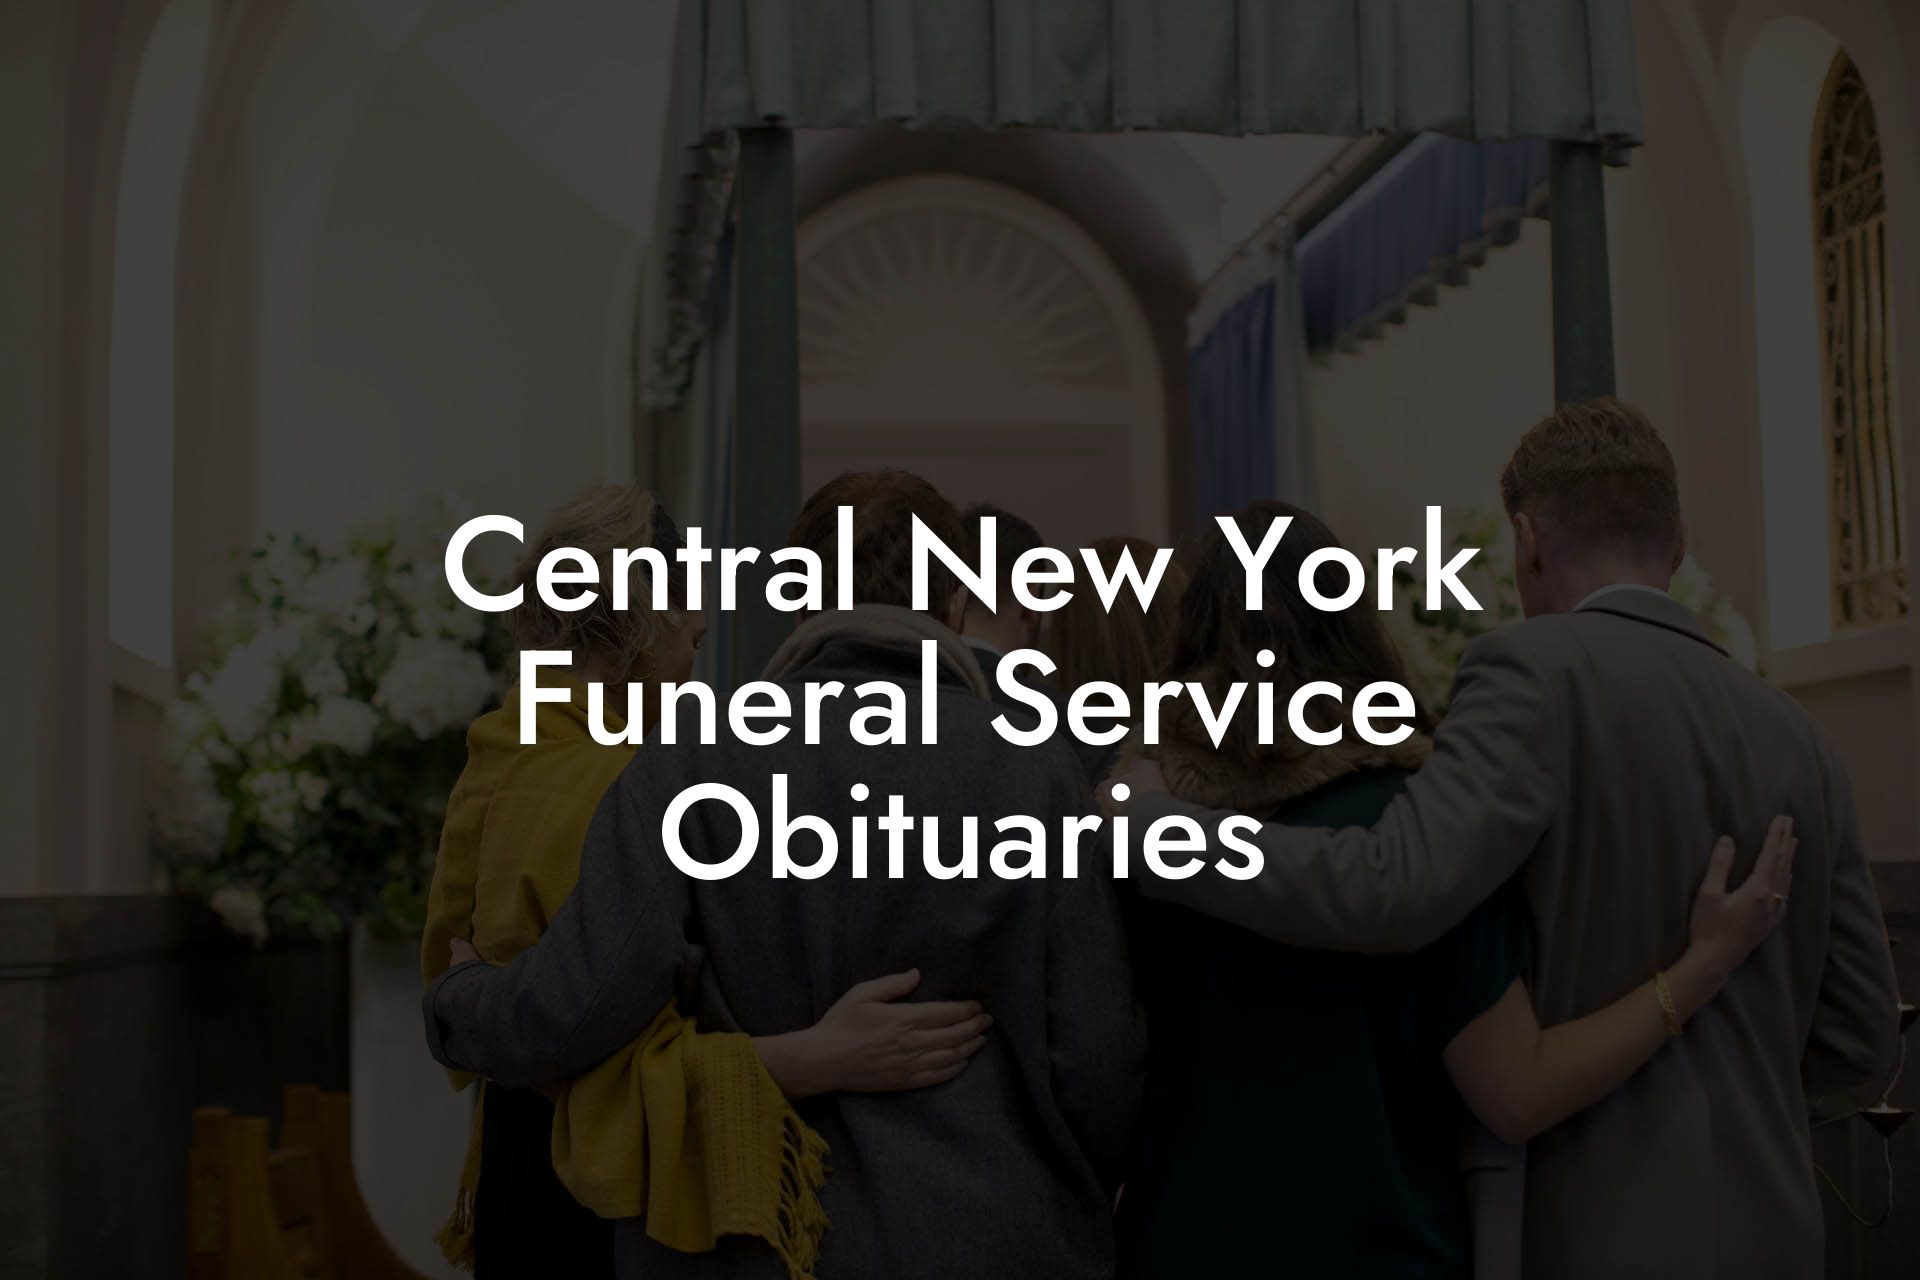 Central New York Funeral Service Obituaries